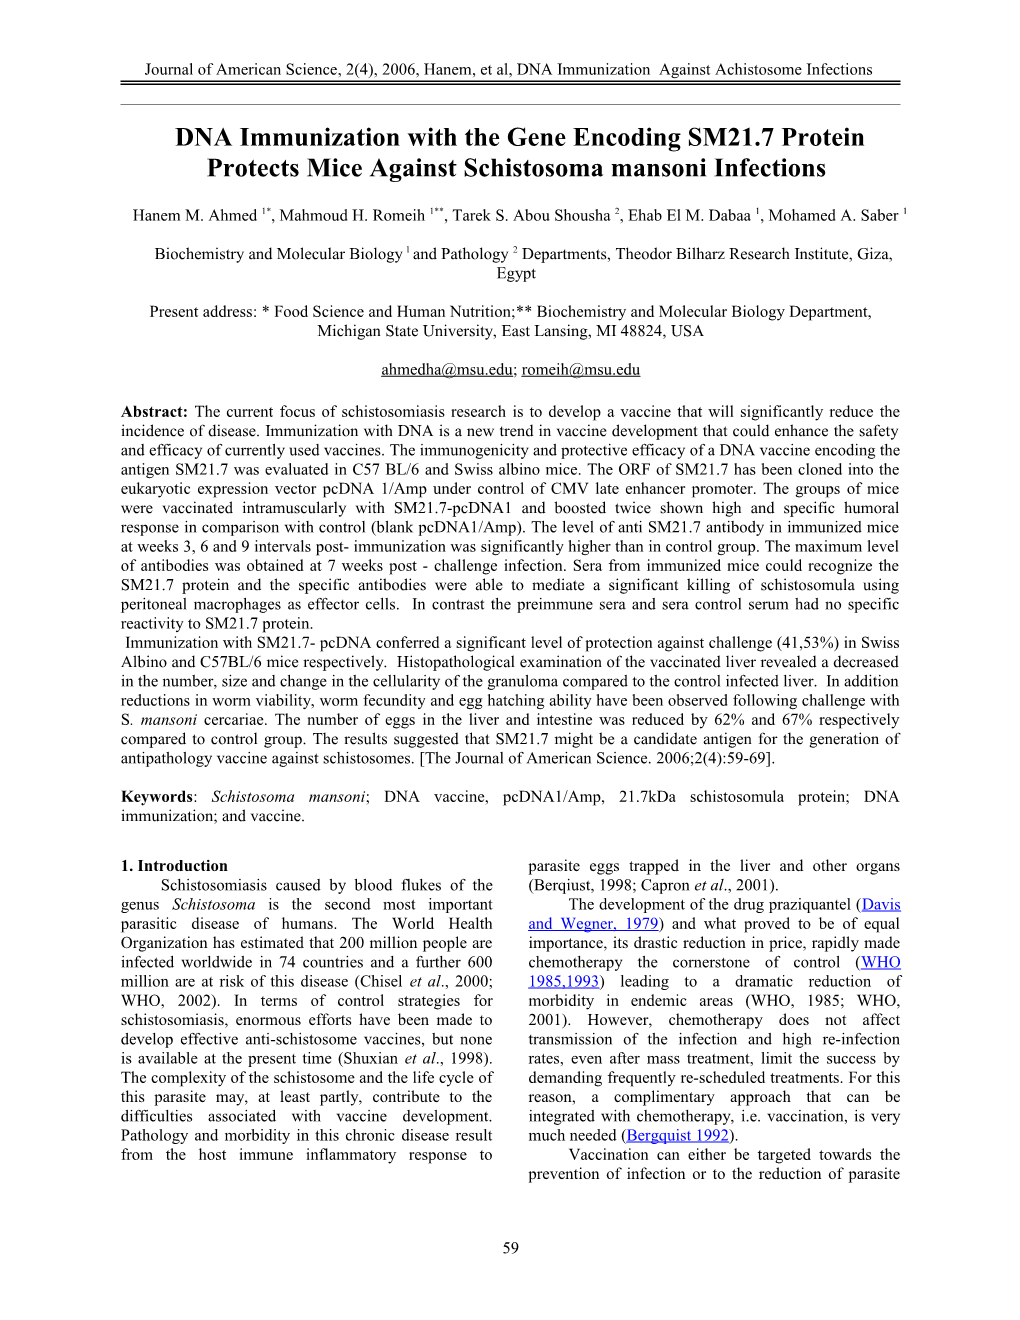 Vaccination Against Schistosoma Mansoni Infection by DNA Encoding SM 21